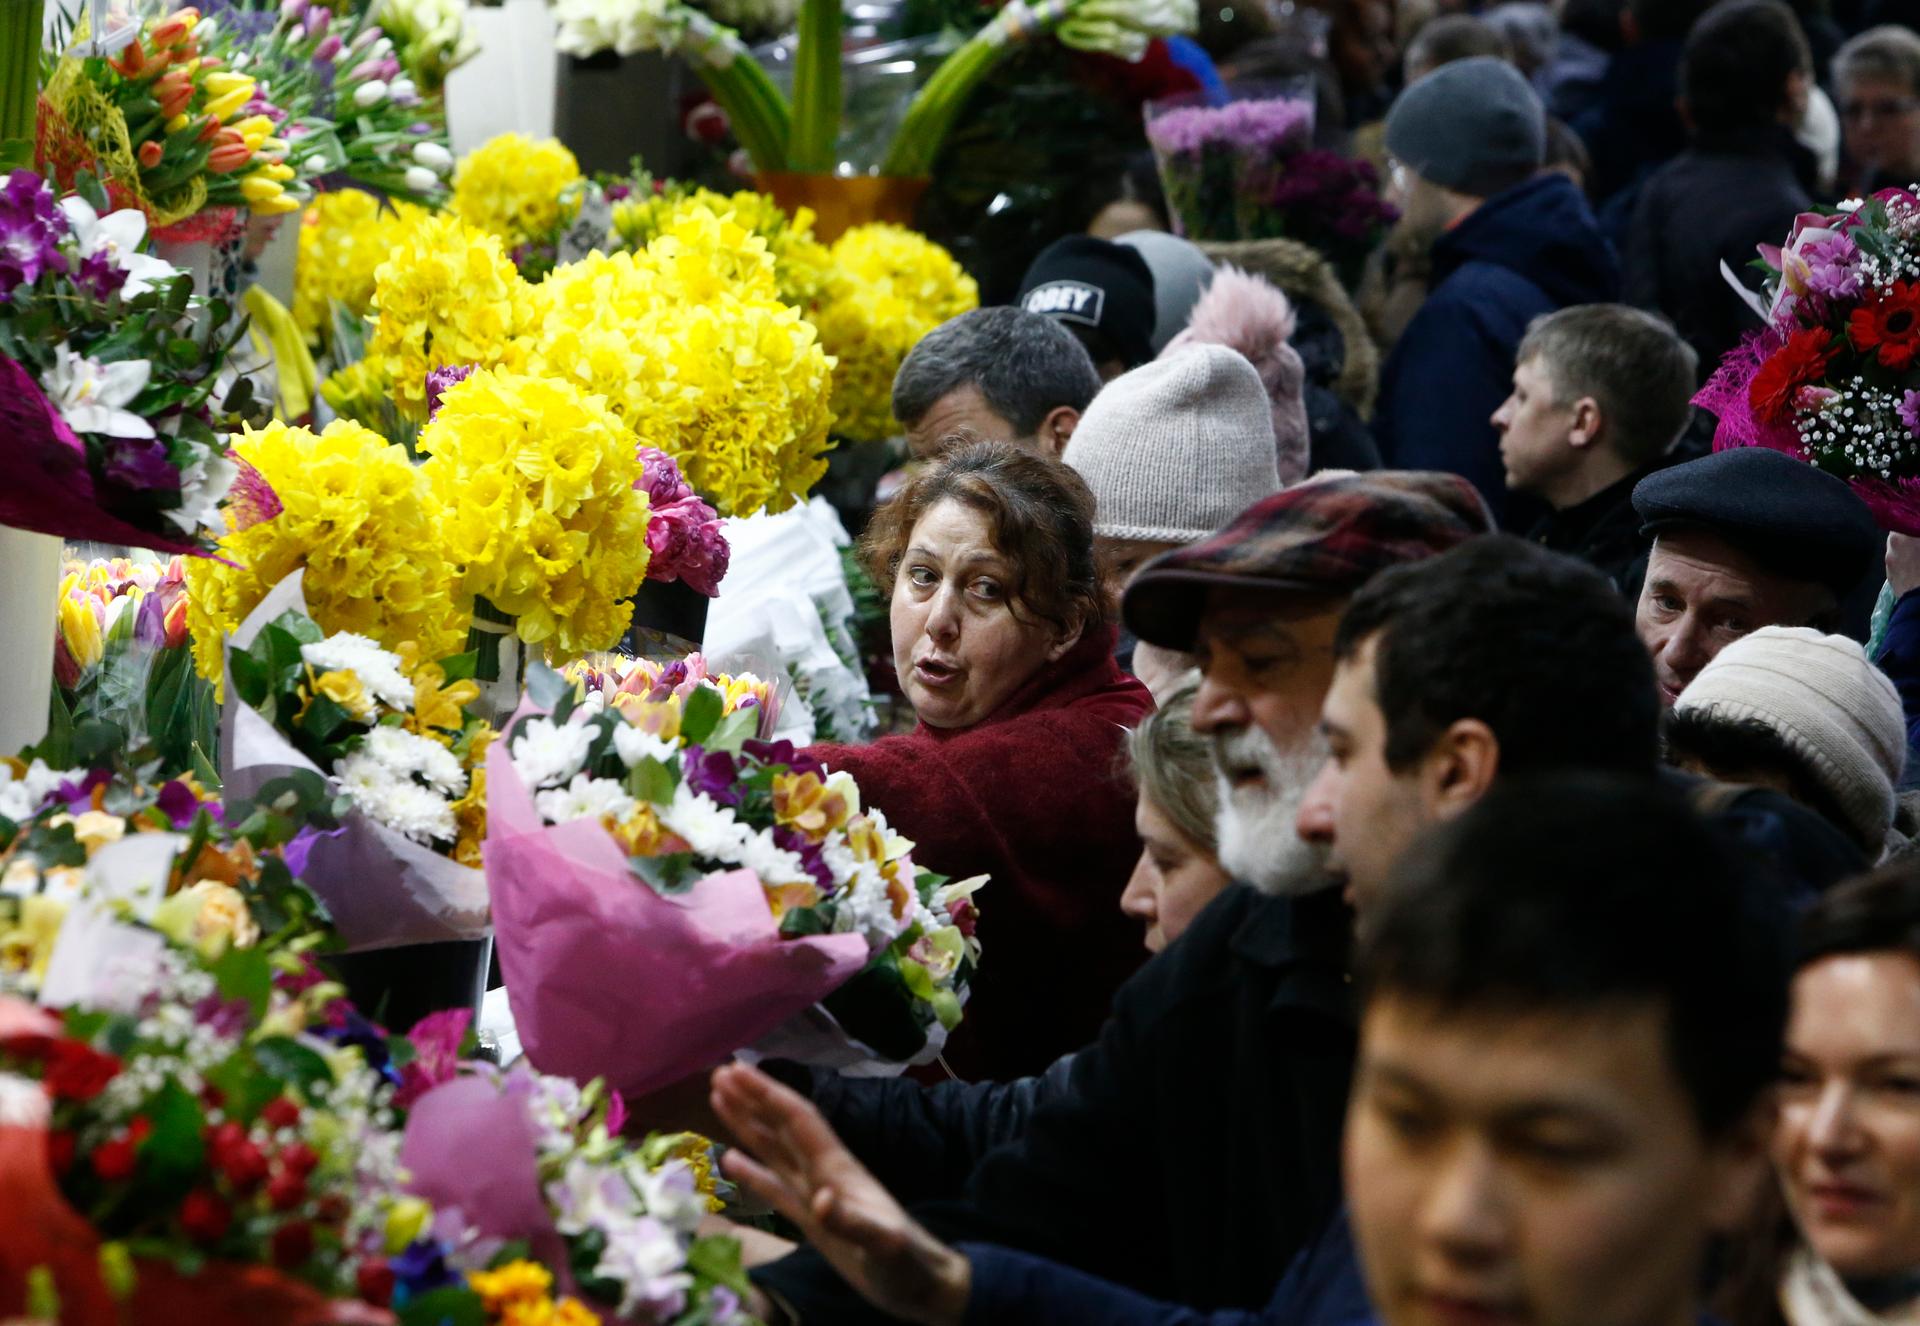 A vendor sells flowers for the upcoming International Women's Day at the Rizhsky flower market in Moscow, Russia March 7, 2017.